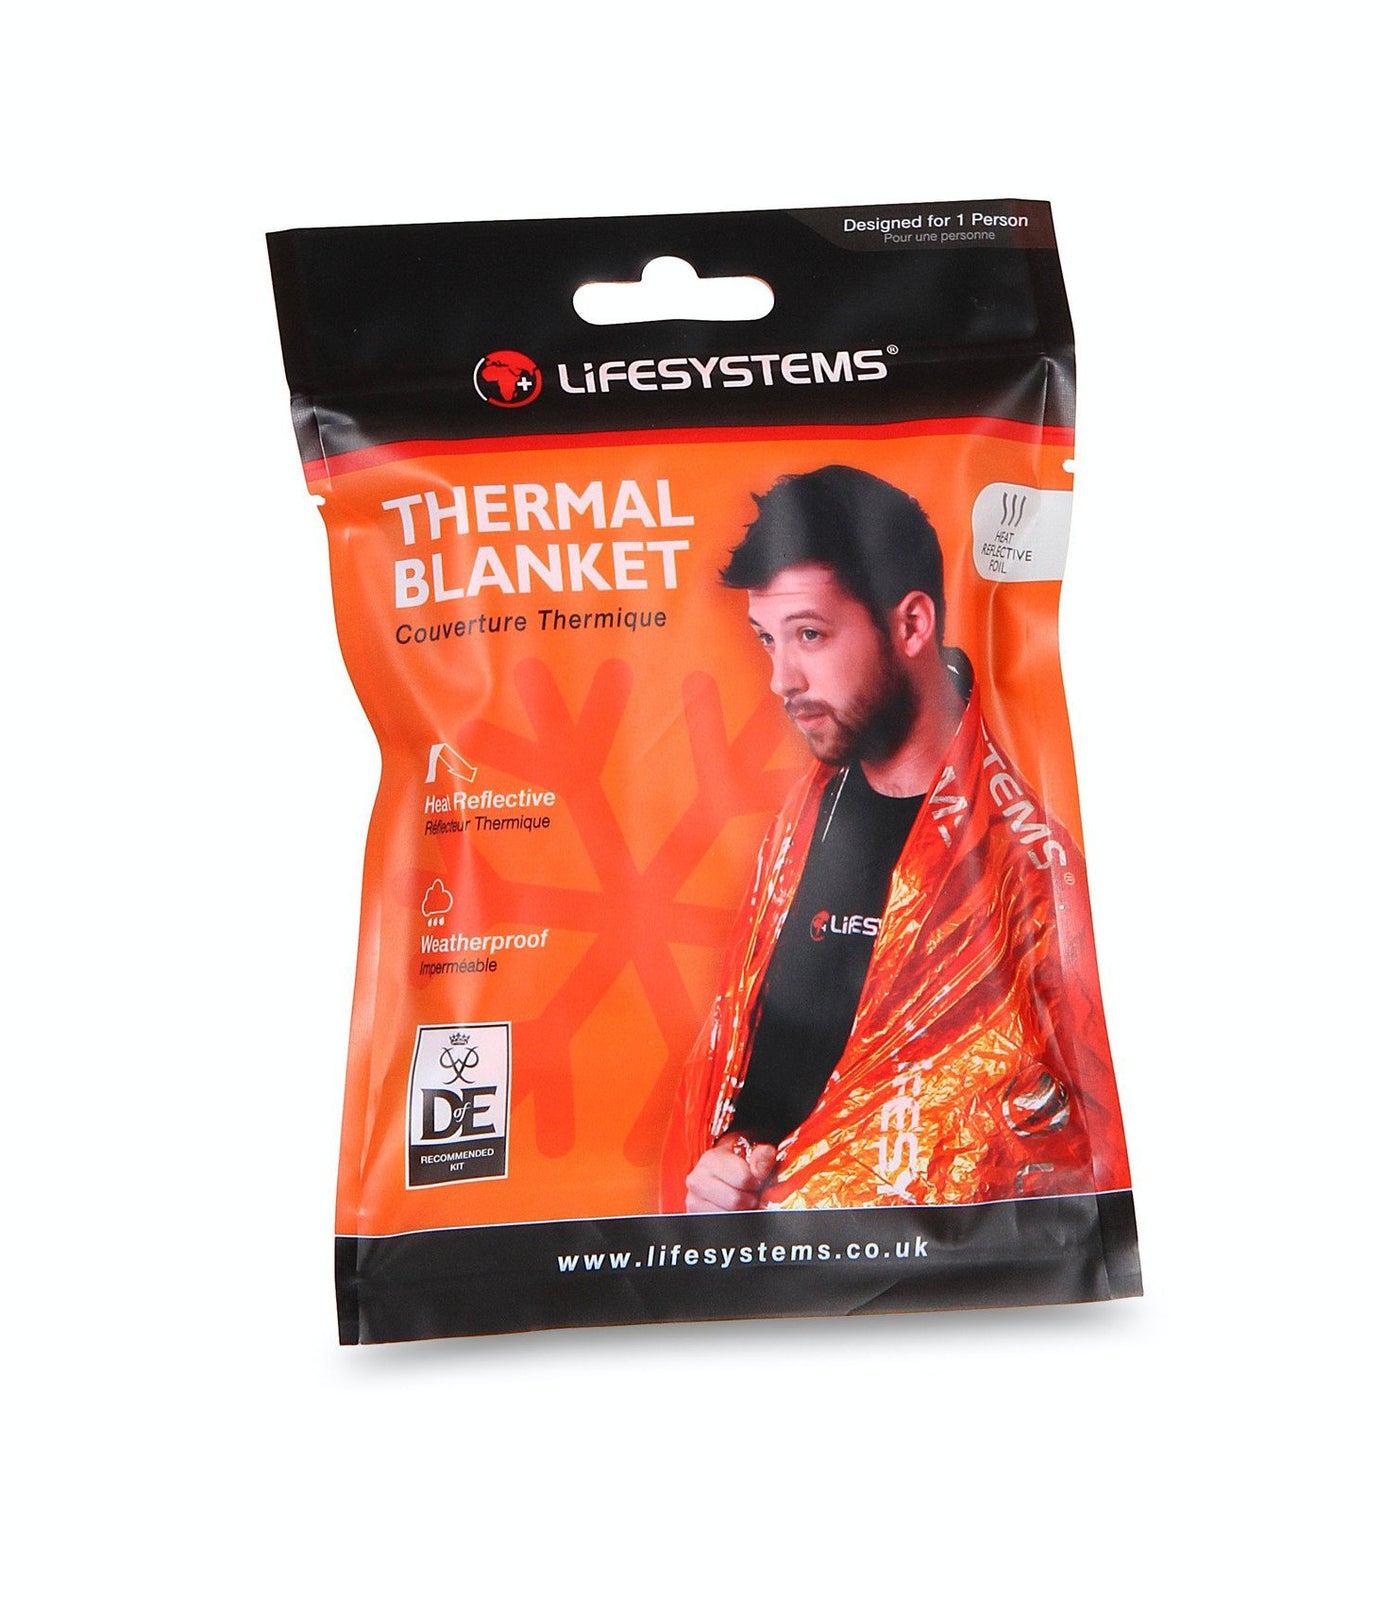 Lifesystems Thermal Blanket | Survival Gear for the Outdoors | NZ